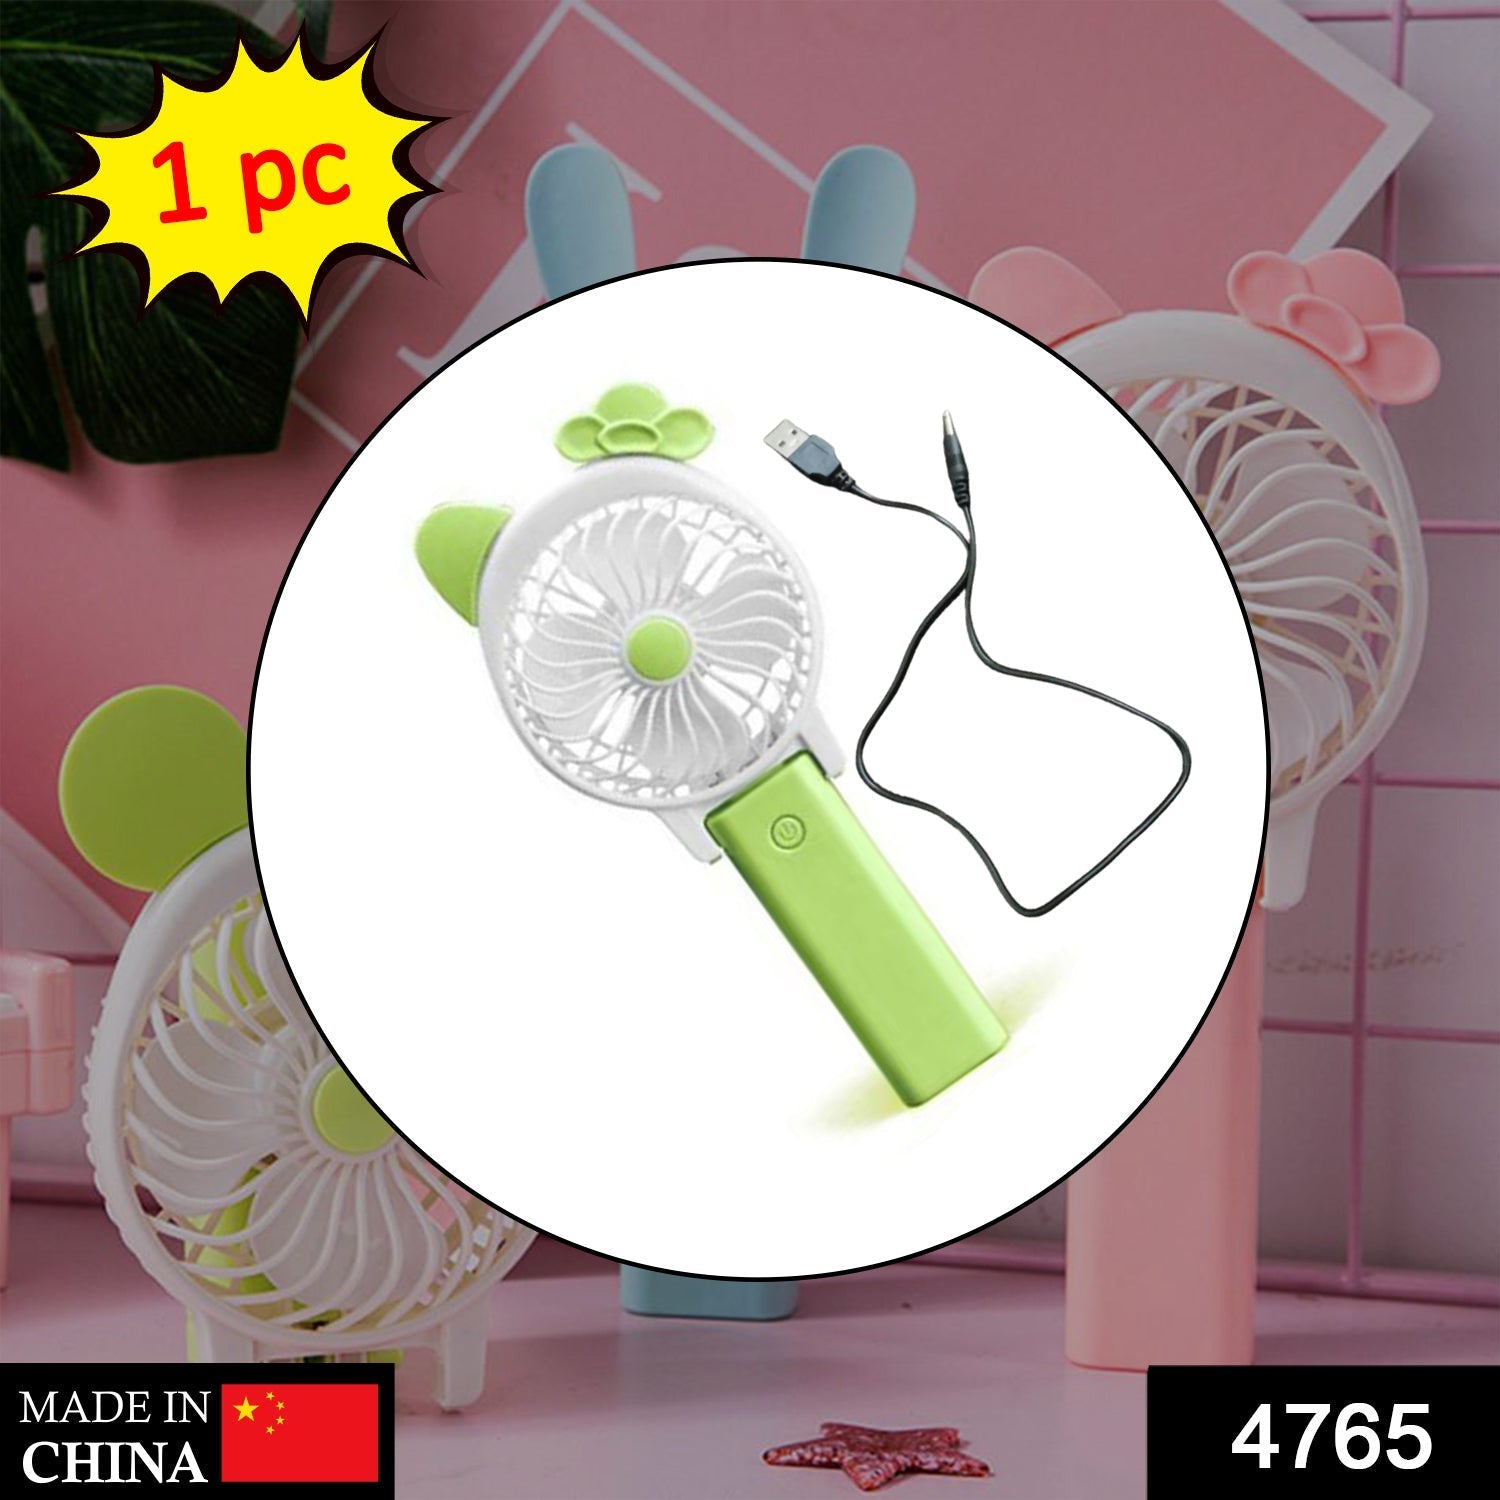 4765 Mini Cartoon Style Fan used in all kinds of places including household and many more for producing fresh air purposes.